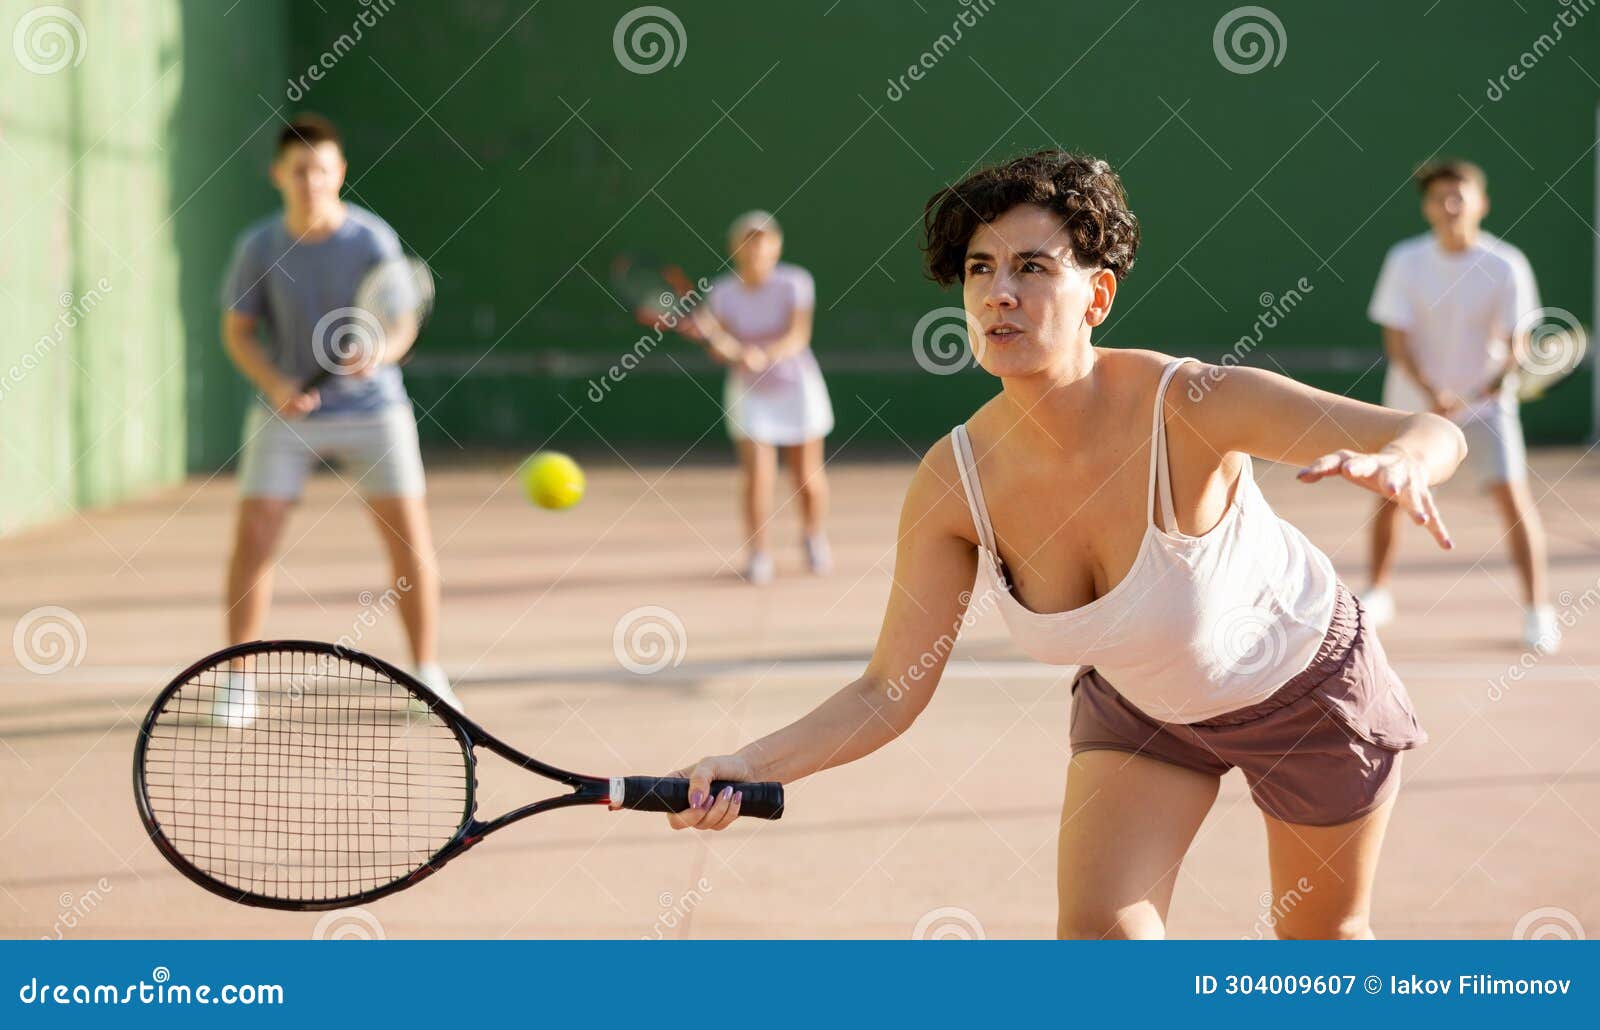 woman playing frontenis on outdoor pelota court